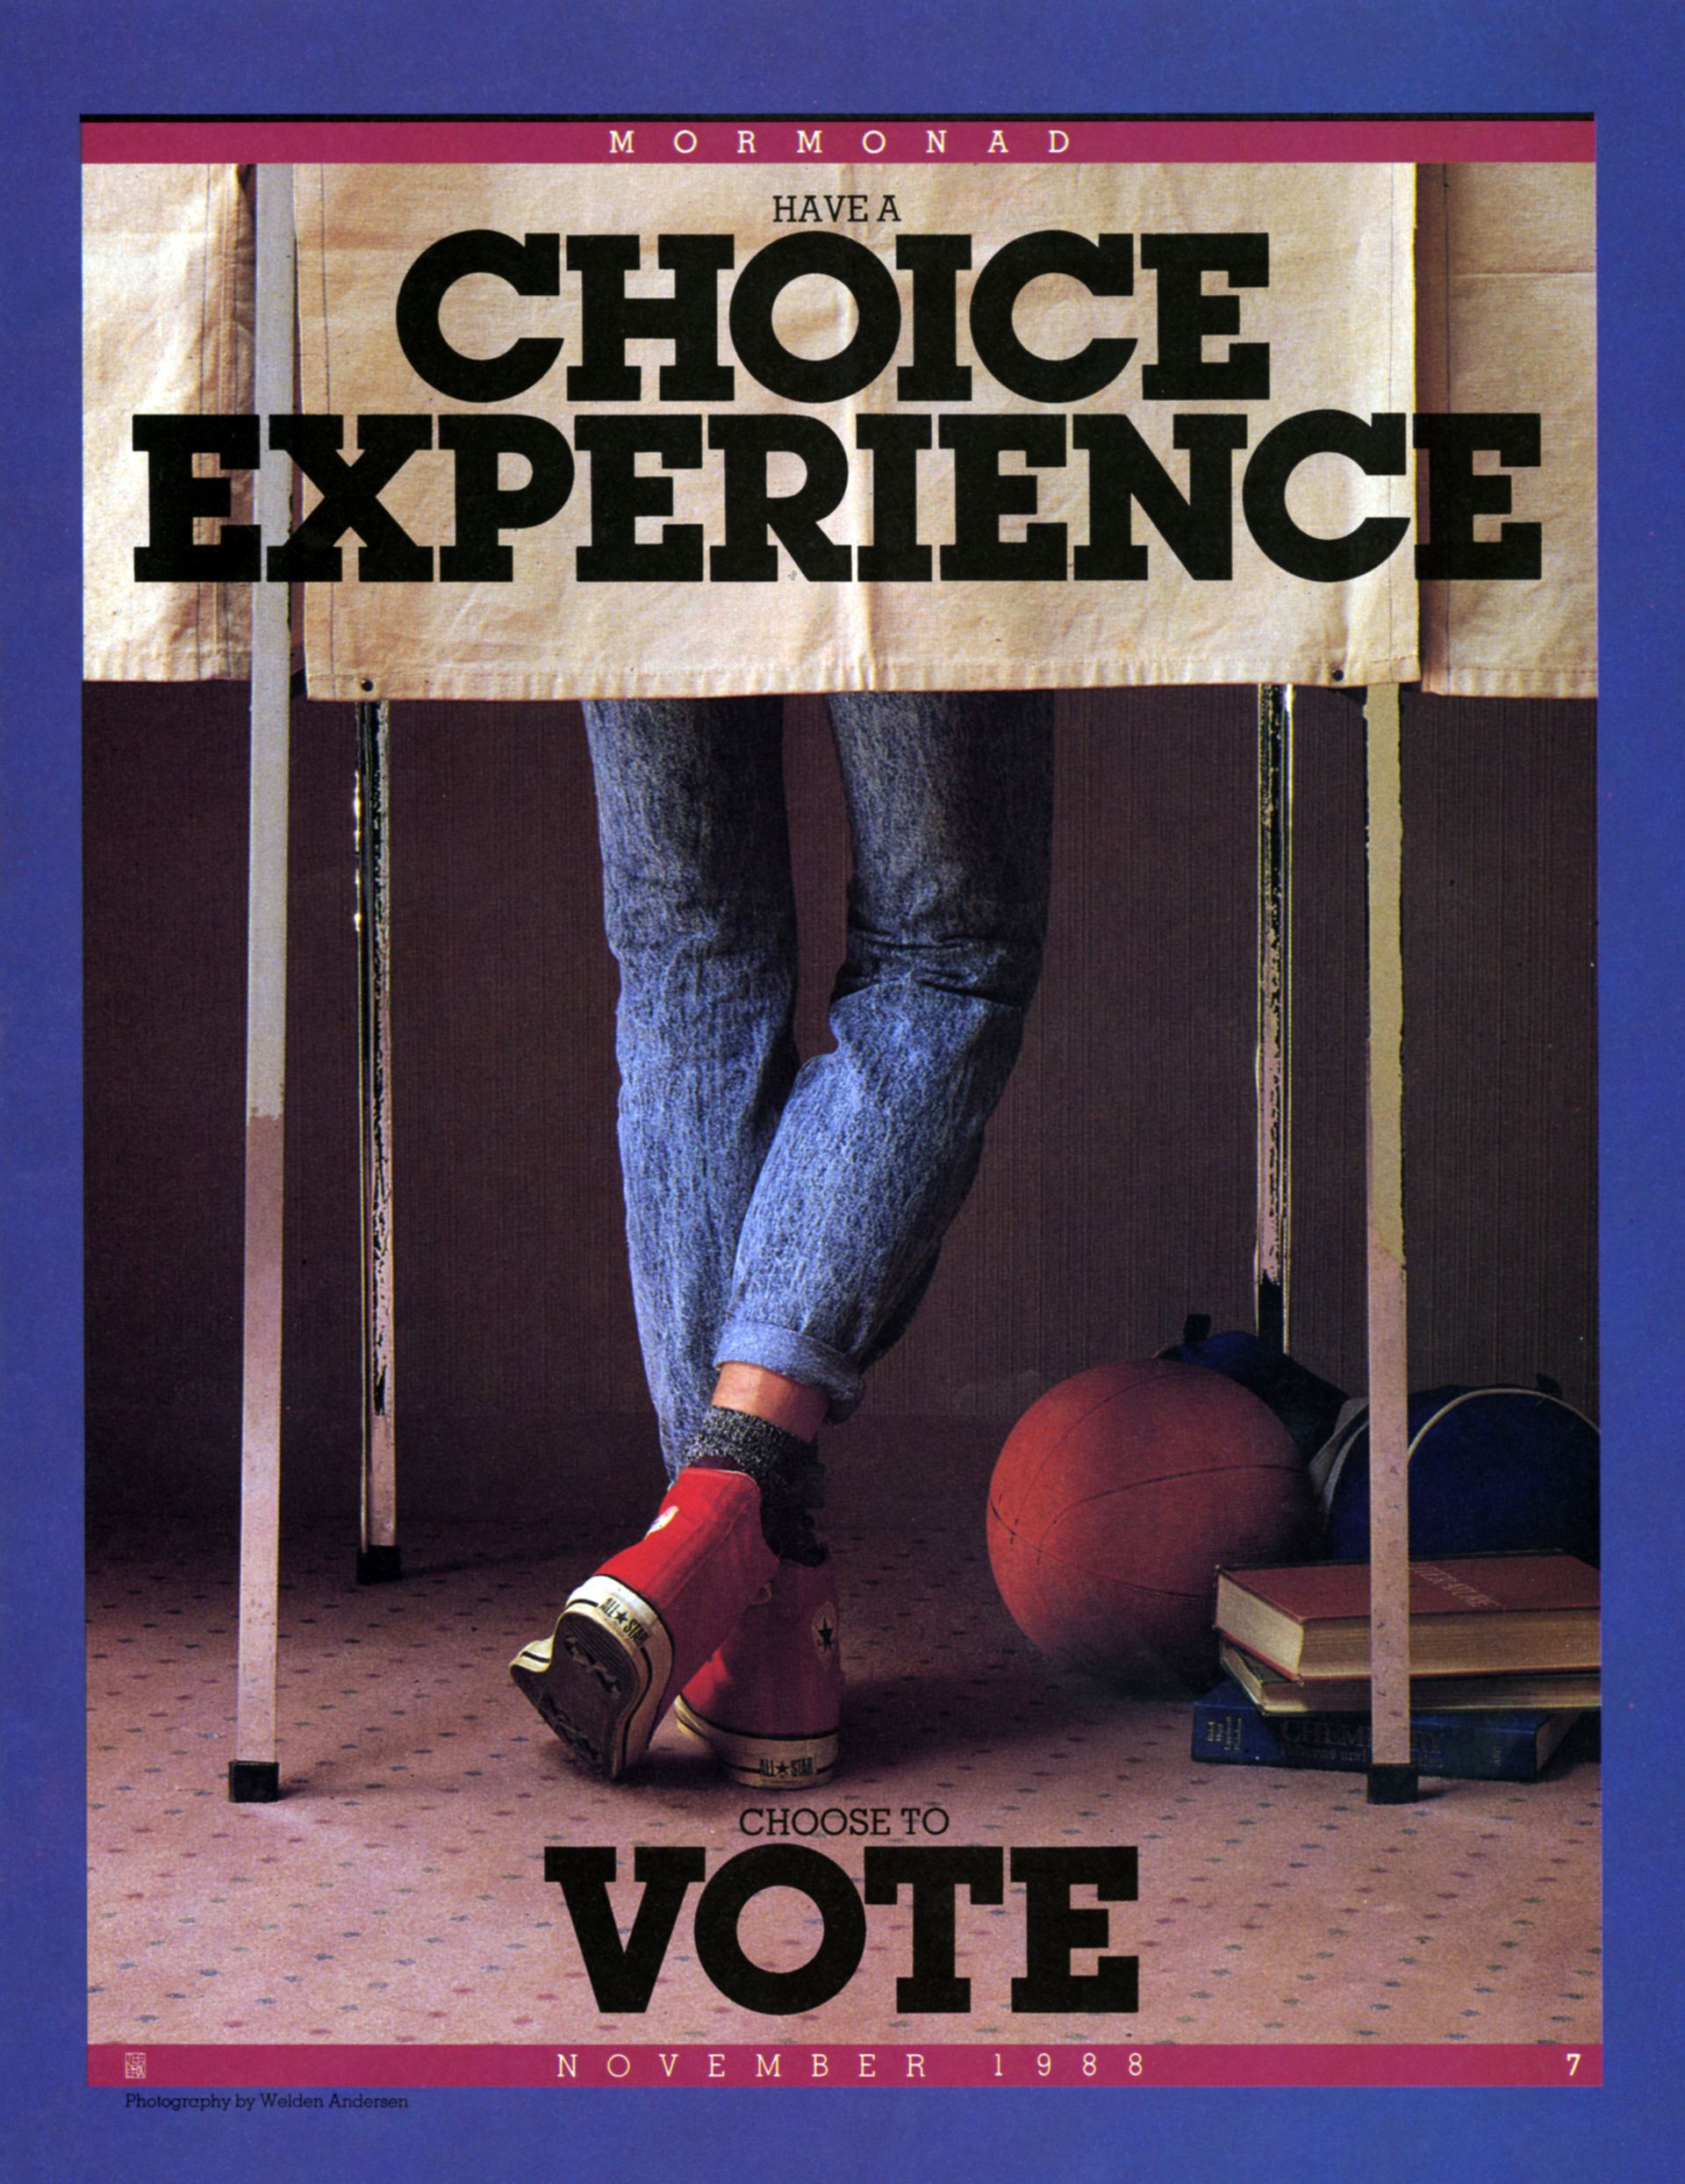 Have a Choice Experience. Choose to Vote. Nov. 1988 © undefined ipCode 1.